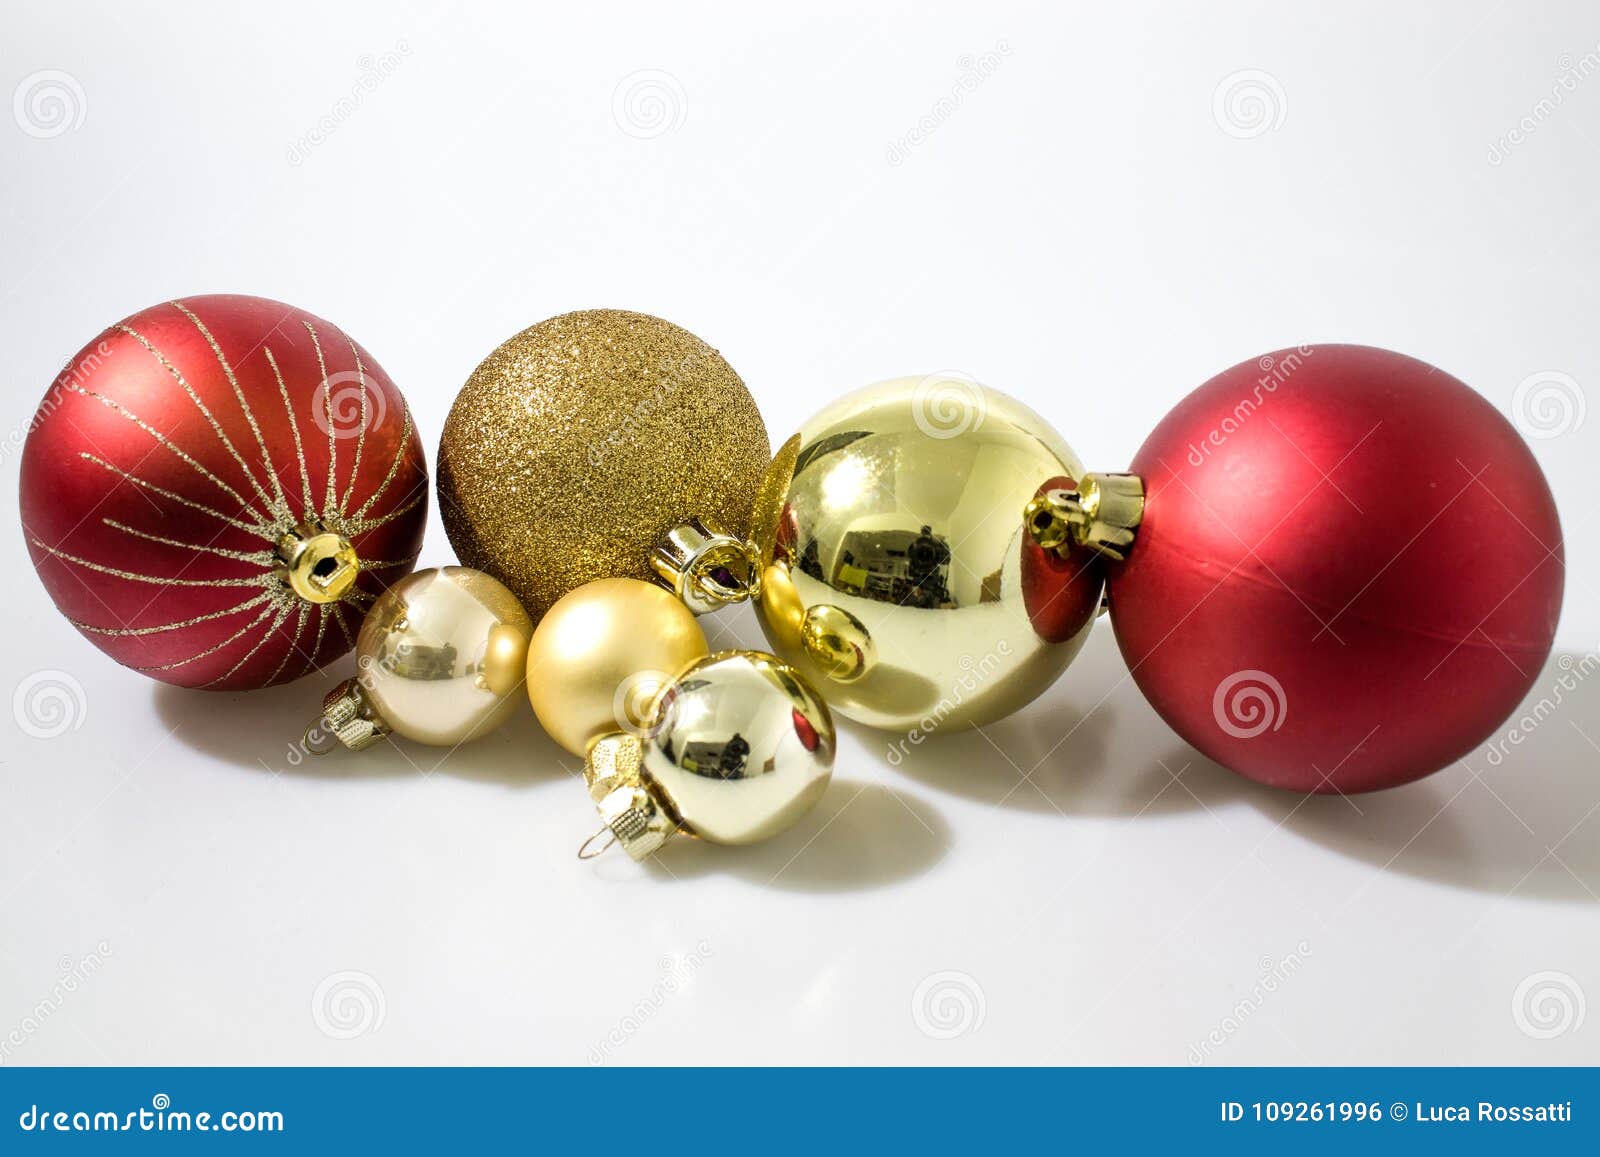 Red And Gold Christmas Balls Decorations In A White Background Stock ...